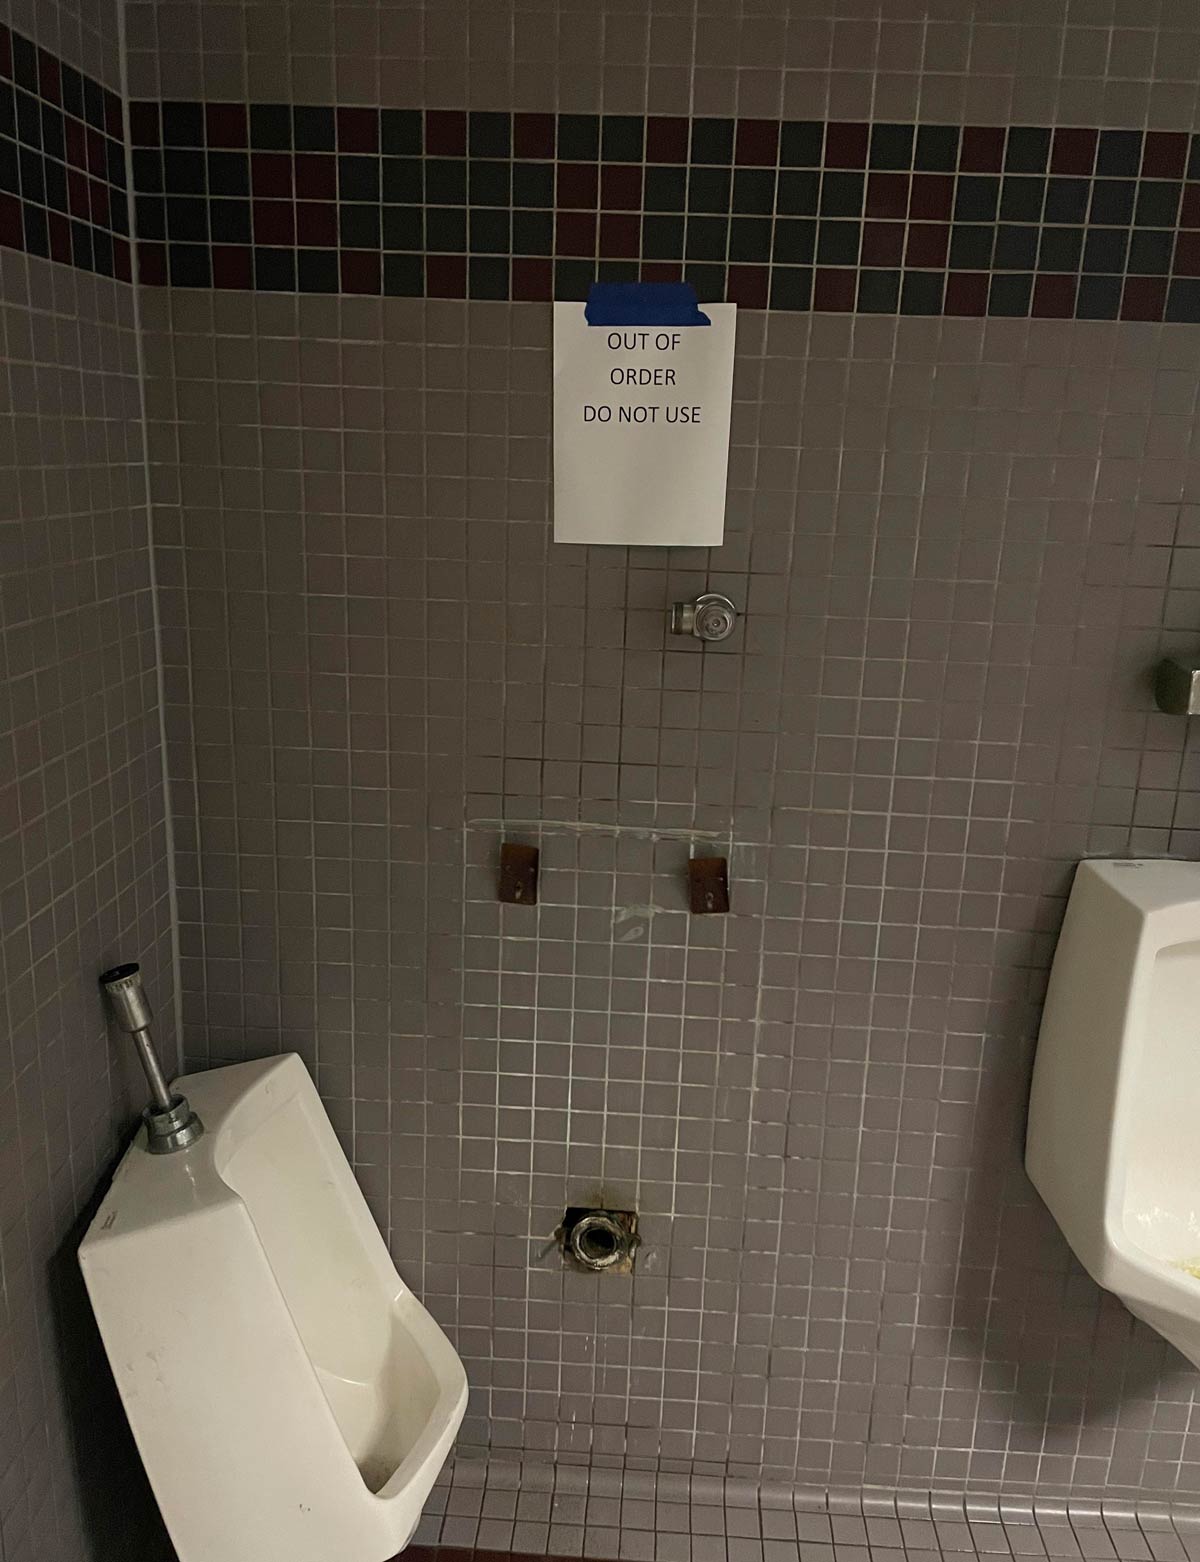 Is the sign really needed?